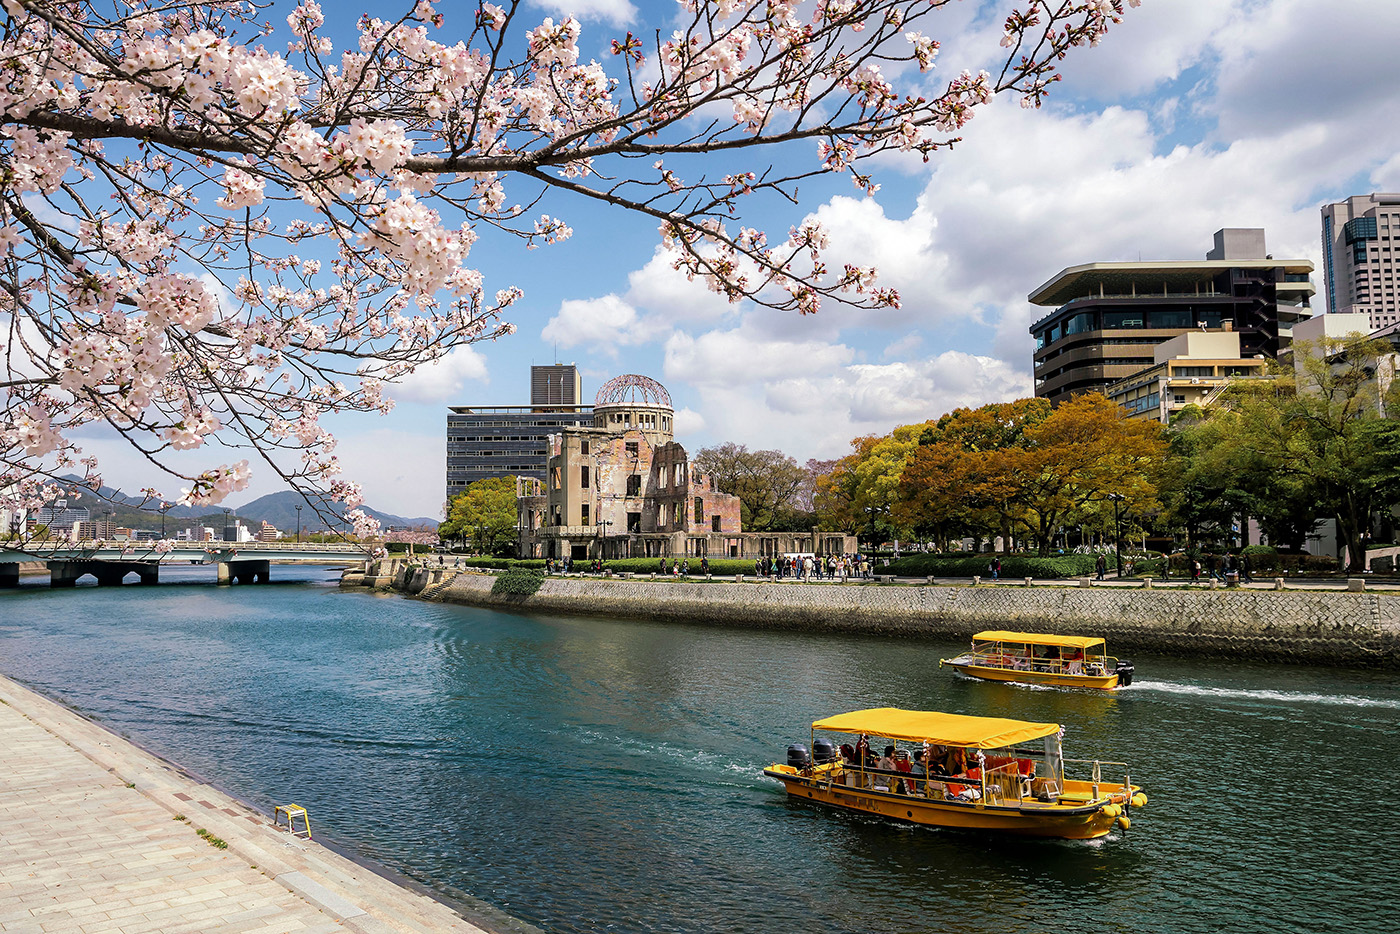 Kobe's cherry blossoms add a touch of softness to the presence of the Hiroshima Atomic Bomb Dome, creating a simple yet thought-provoking tableau